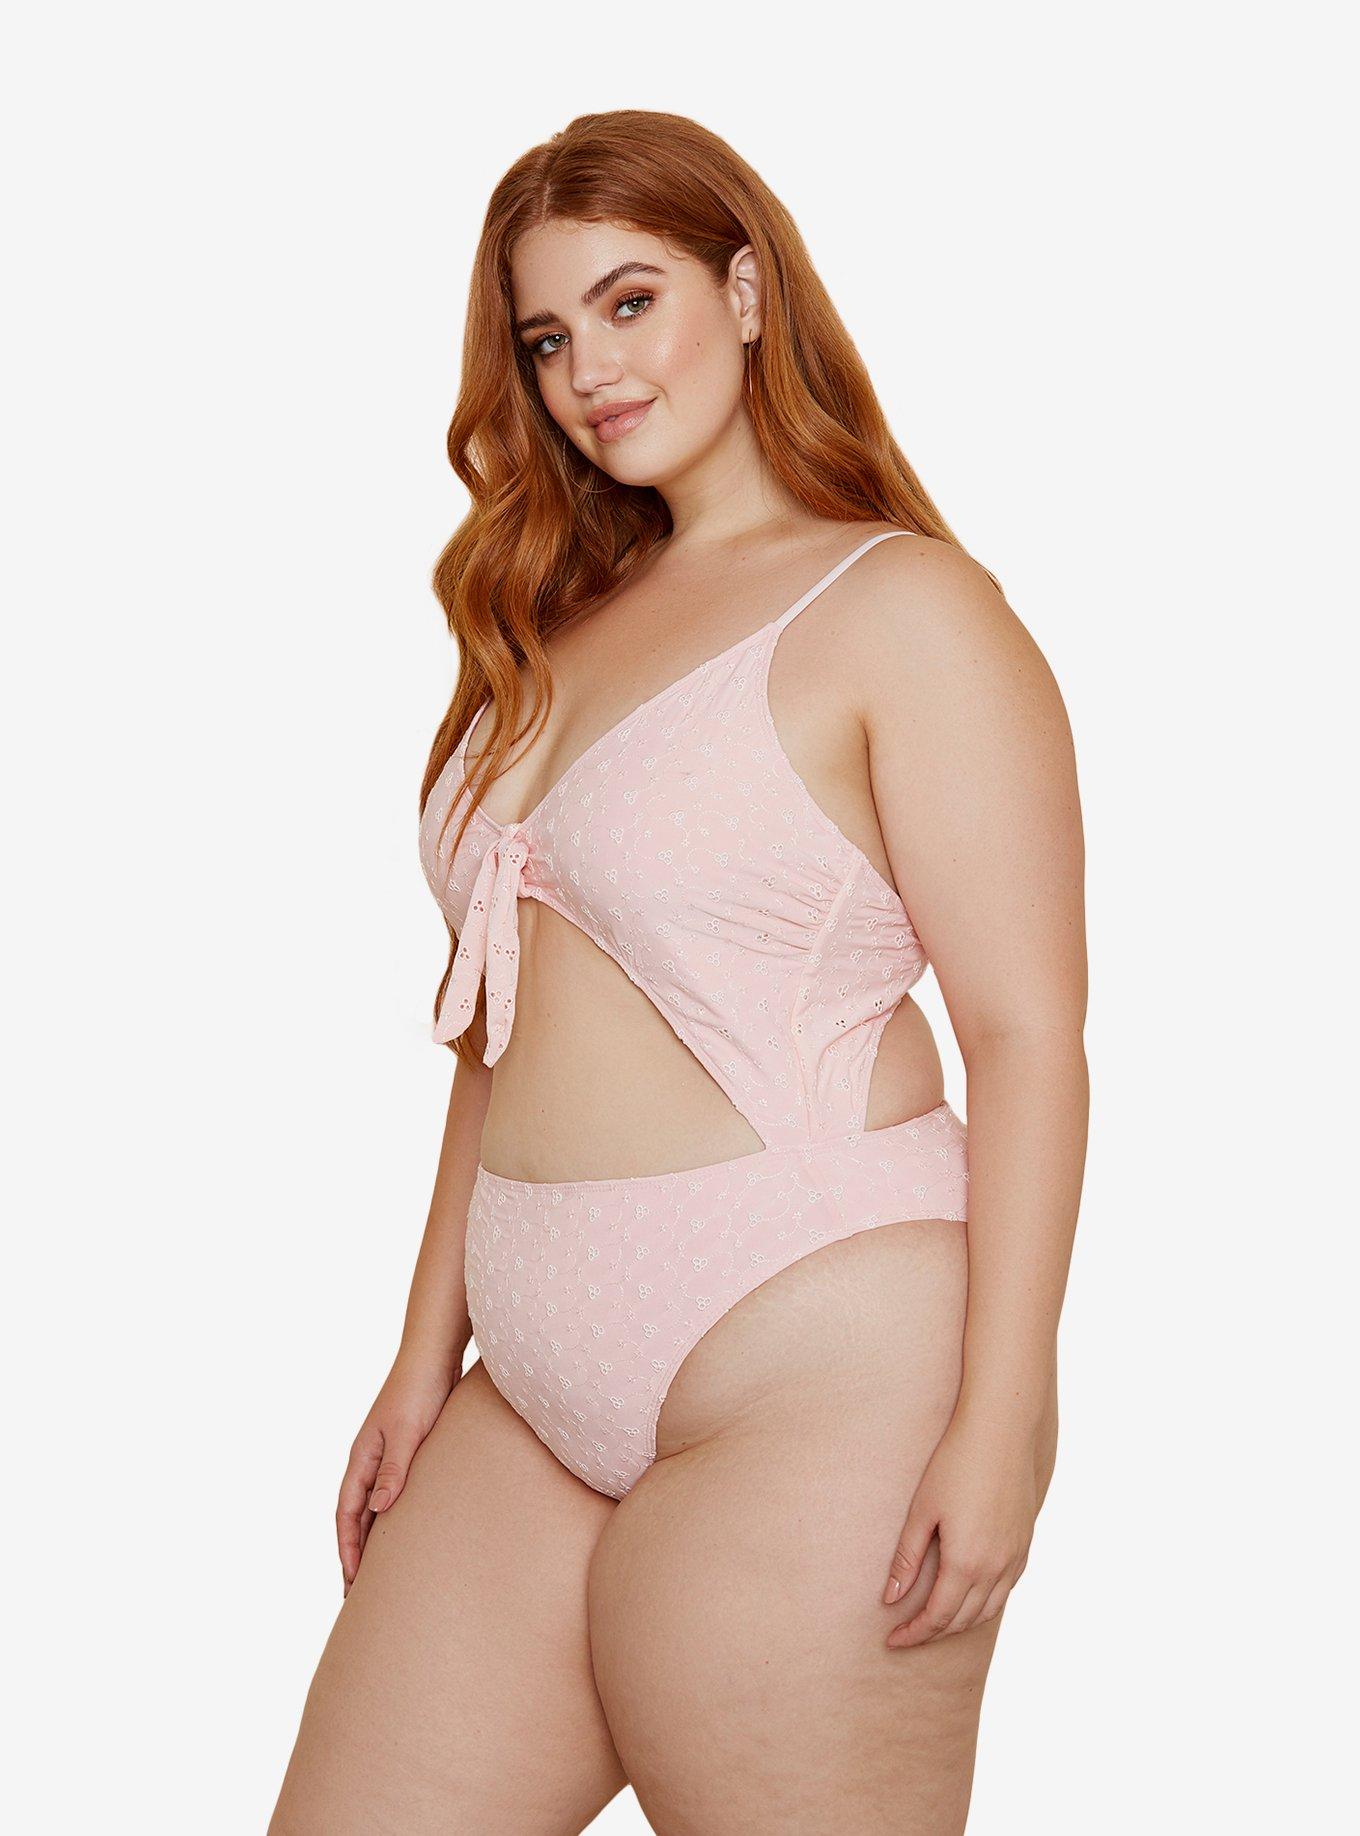 Dippin' Daisy's Glam Swimsuit Rosewater Eyelet Plus Size, PINK, alternate